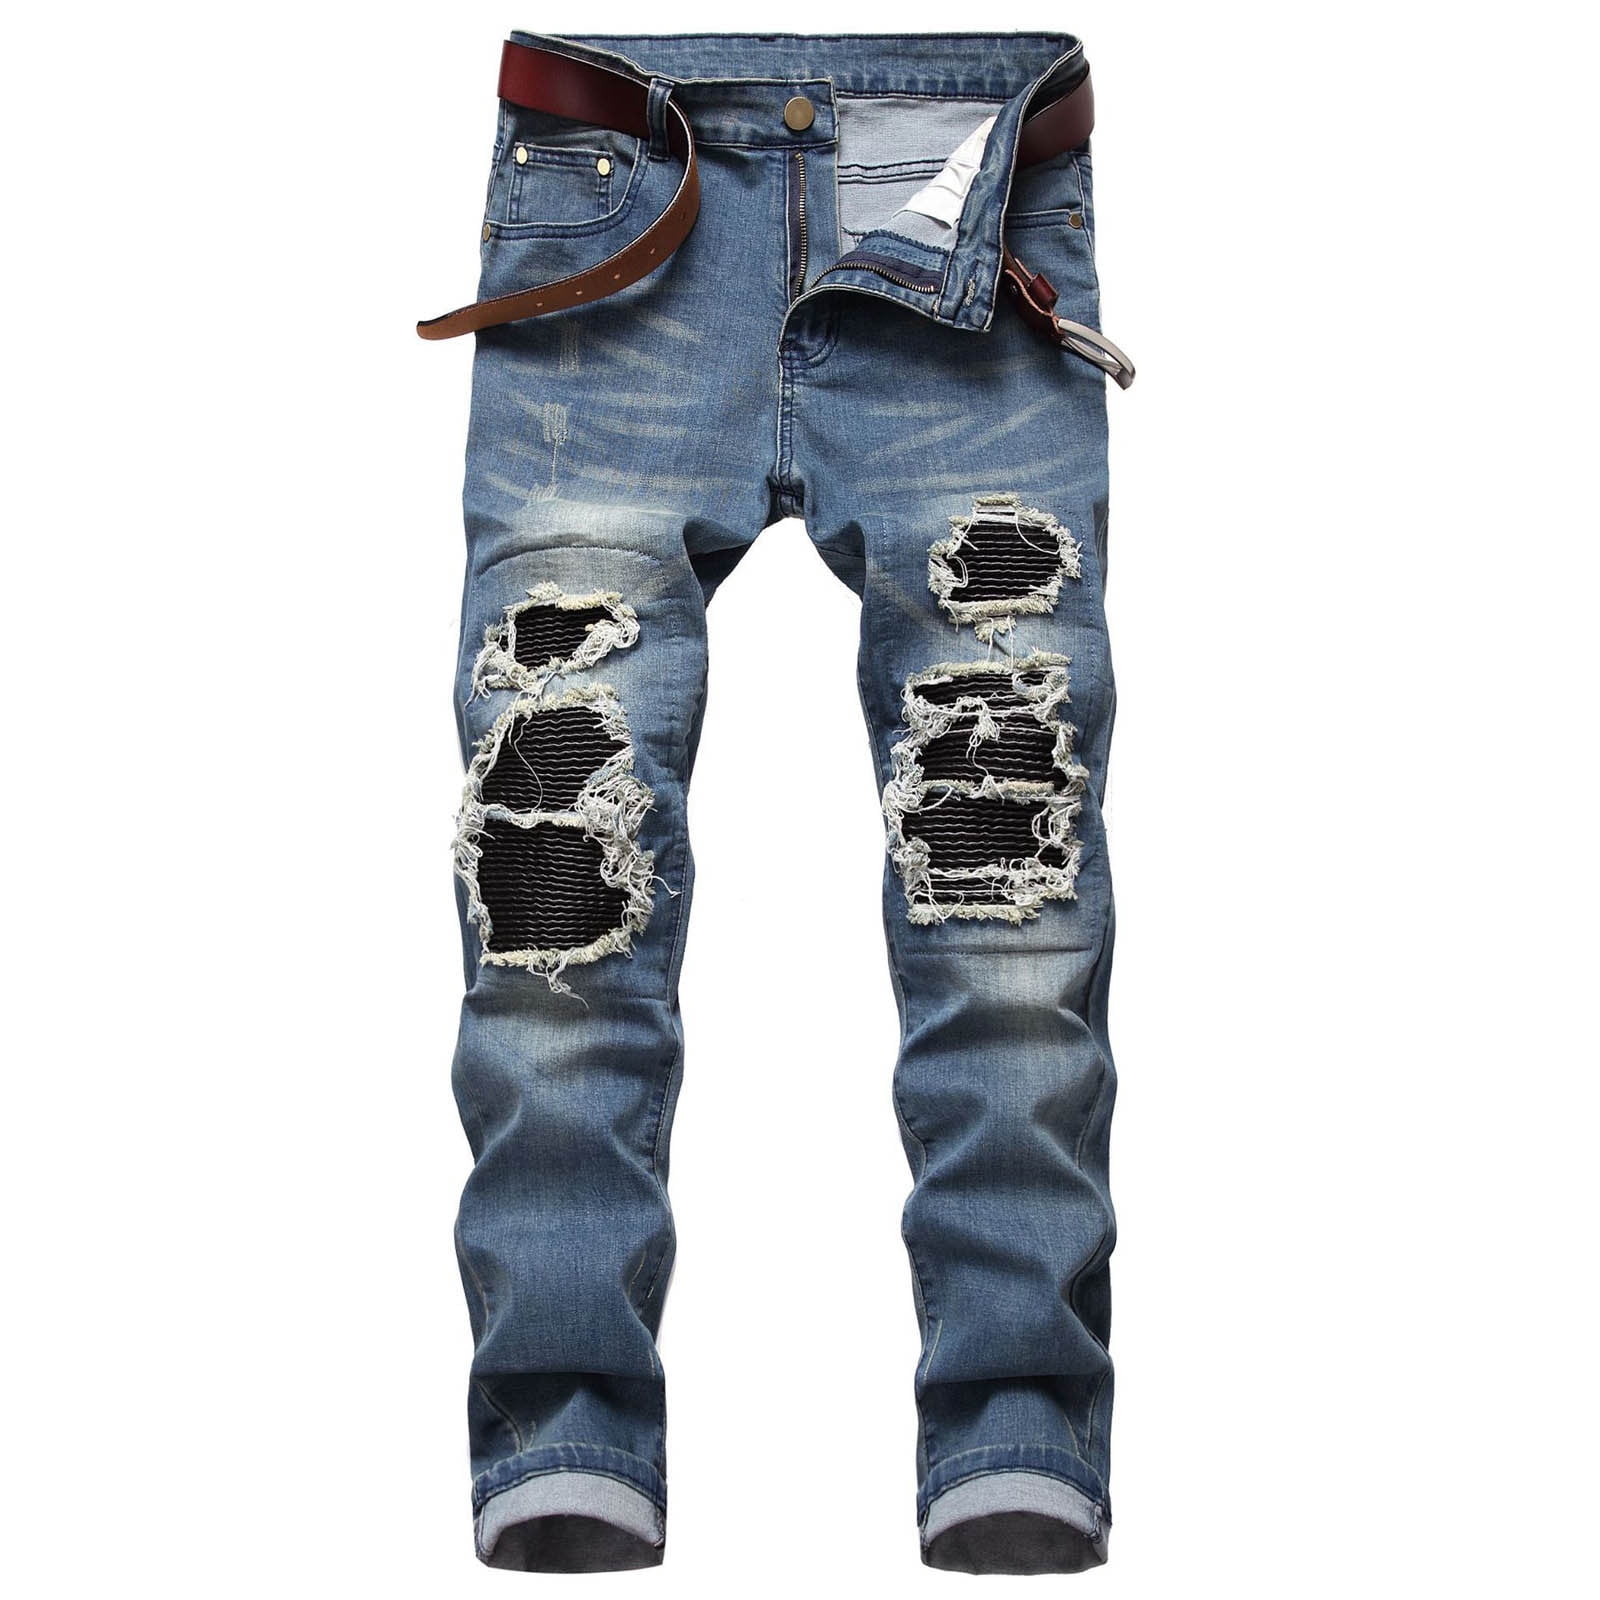 Lilgiuy Men's Casual Autumn Denim Cotton Straight Ripped Hole Trousers ...